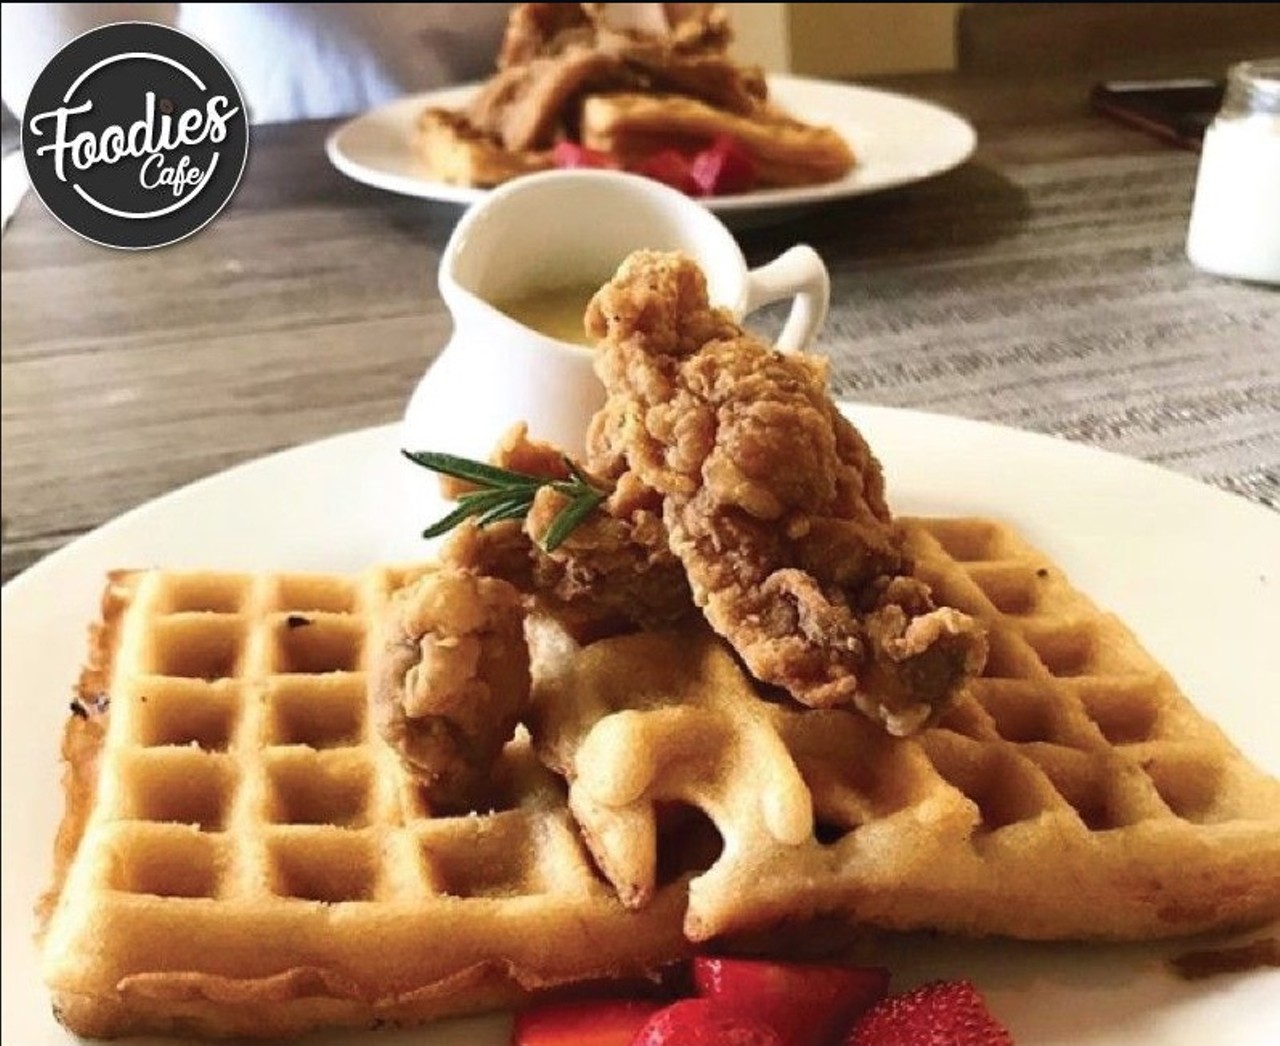 Foodies Cafe 
436 S. Parramore Ave., 407-648-4343
Parramore coffee shop and breakfast/lunch spot offers all the requisite varieties of precious, precious caffeine but also chicken and waffles and decadent pound cake creations.   
Photo via Facebook